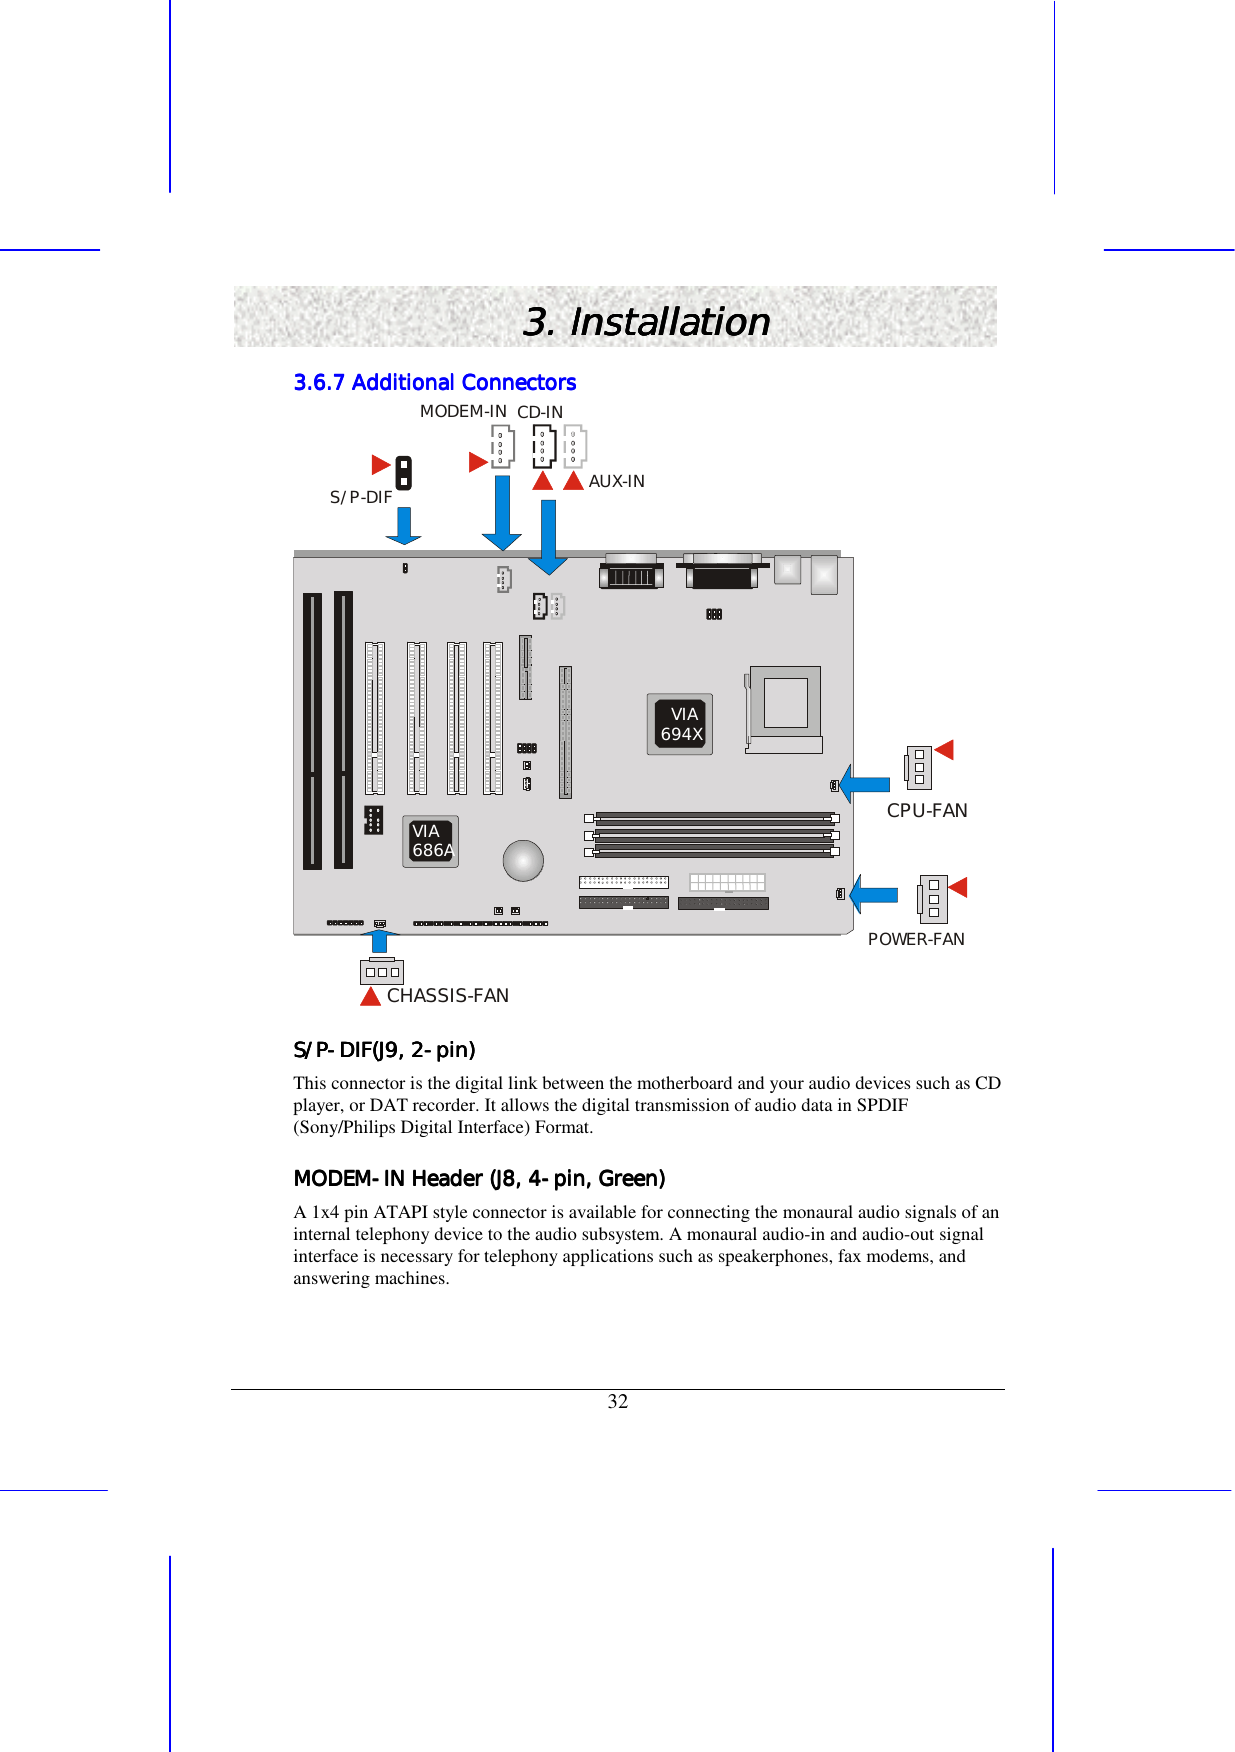   32 3. Installation3. Installation3. Installation3. Installation    3.6.7 Additi3.6.7 Additi3.6.7 Additi3.6.7 Additional Connectorsonal Connectorsonal Connectorsonal Connectors     MODEM-IN CD-INVIA 686A VIA694XCHASSIS-FAN CPU-FAN POWER-FAN S/P-DIF AUX-IN  S/PS/PS/PS/P----DIF(J9, 2DIF(J9, 2DIF(J9, 2DIF(J9, 2----pin)pin)pin)pin)    This connector is the digital link between the motherboard and your audio devices such as CD player, or DAT recorder. It allows the digital transmission of audio data in SPDIF (Sony/Philips Digital Interface) Format. MODEMMODEMMODEMMODEM----IN Header (J8, 4IN Header (J8, 4IN Header (J8, 4IN Header (J8, 4----pin, Green)pin, Green)pin, Green)pin, Green)    A 1x4 pin ATAPI style connector is available for connecting the monaural audio signals of an internal telephony device to the audio subsystem. A monaural audio-in and audio-out signal interface is necessary for telephony applications such as speakerphones, fax modems, and answering machines. 